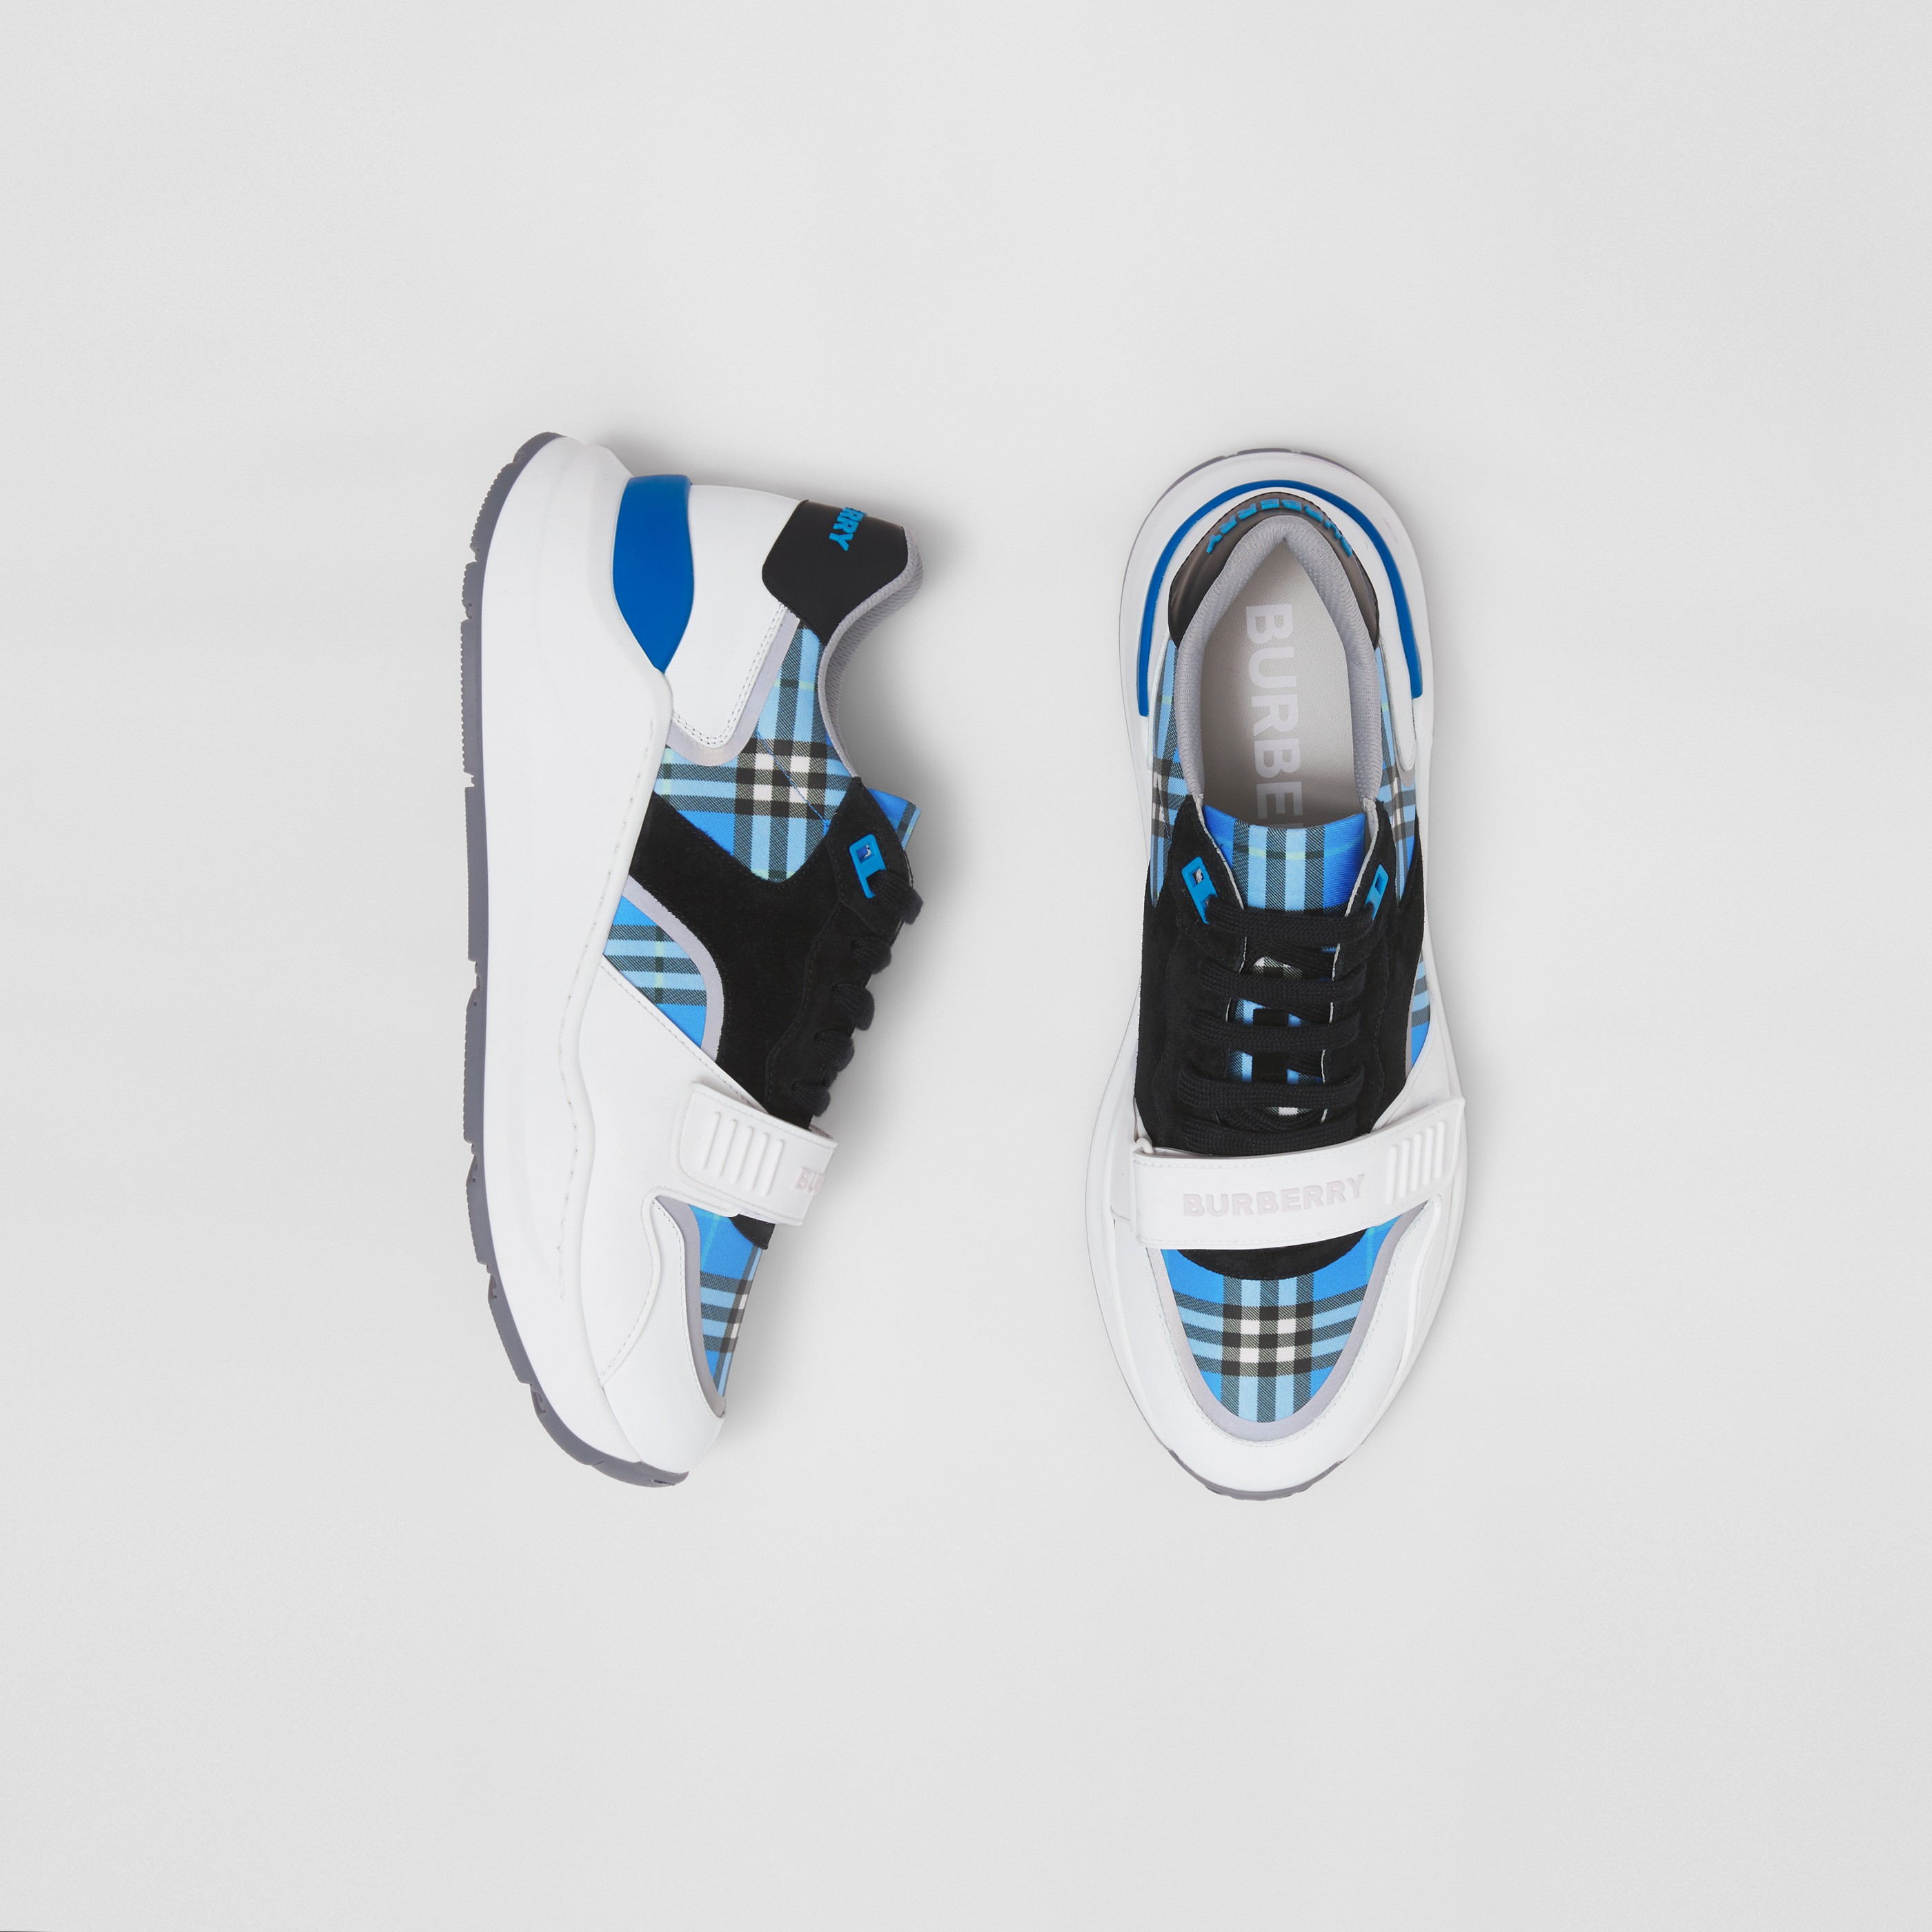 kedelig Omhyggelig læsning mundstykke House Check, Leather and Suede Sneakers in Azure Blue - Men | Burberry